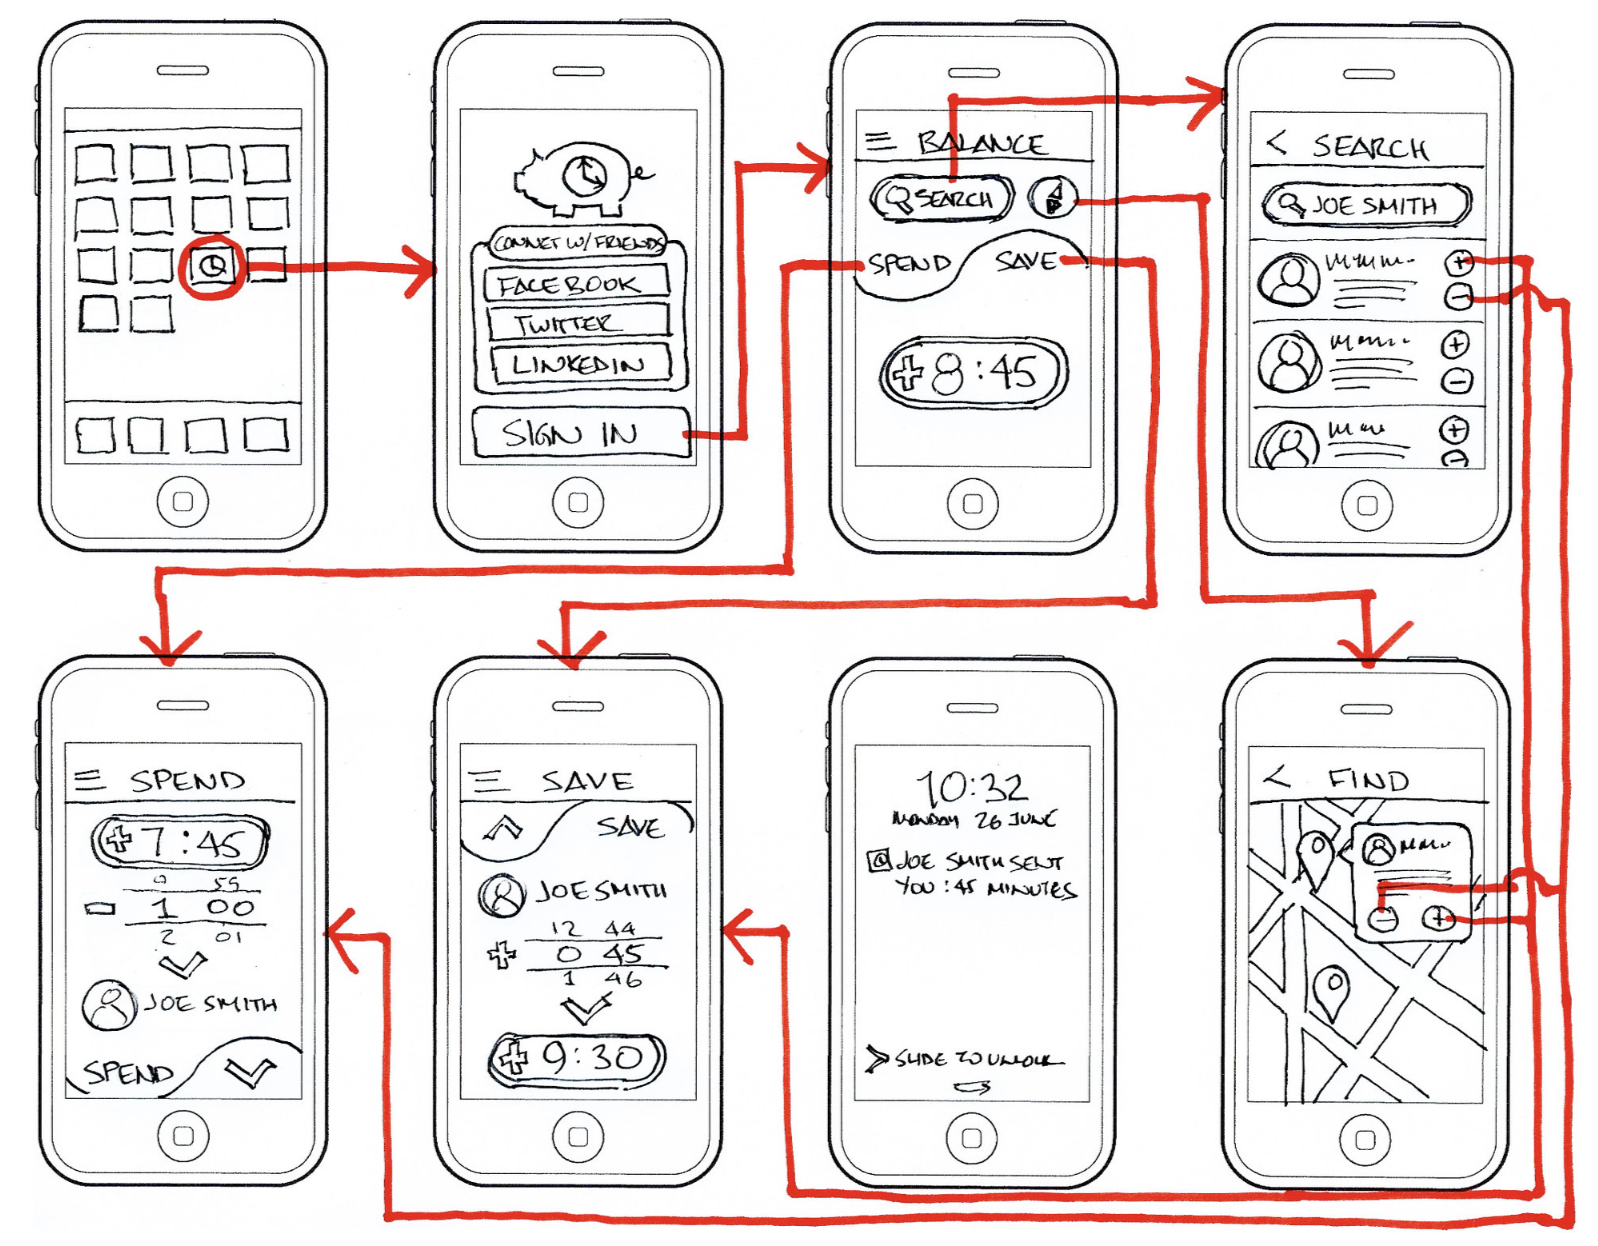 Wireframes of a finance mobile app